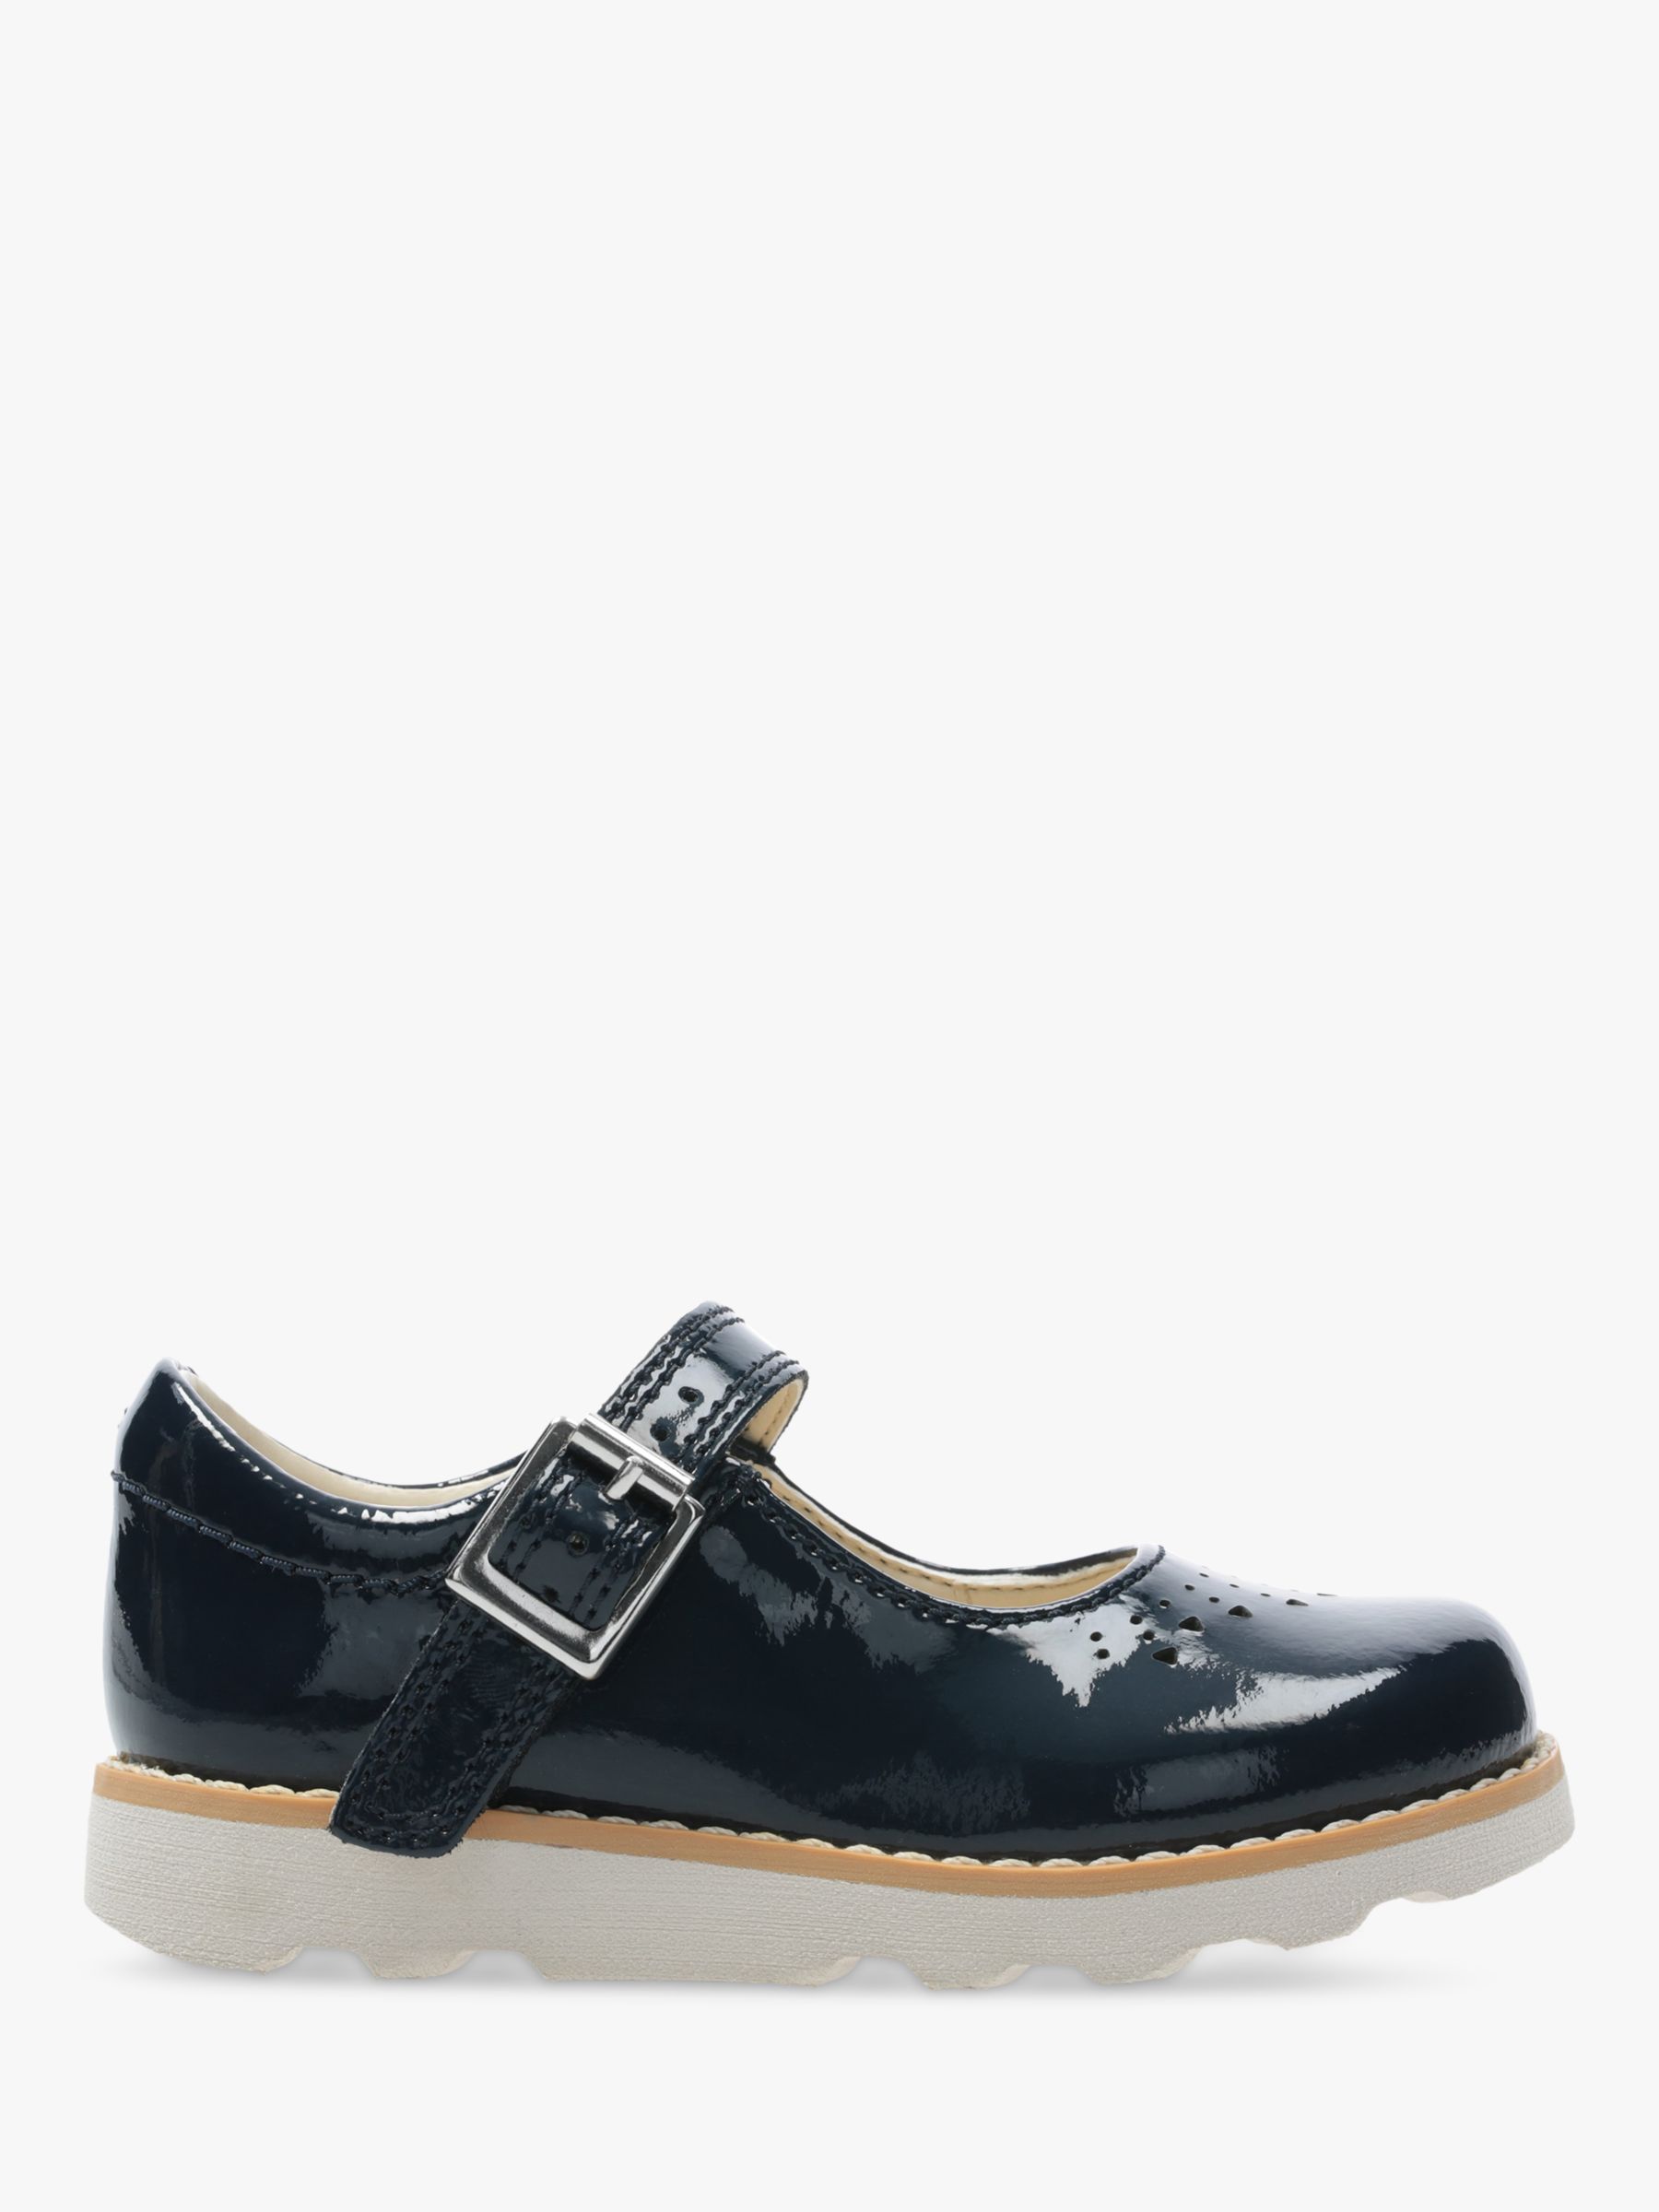 Clarks Kids' Crown Jump Patent Buckle Shoes